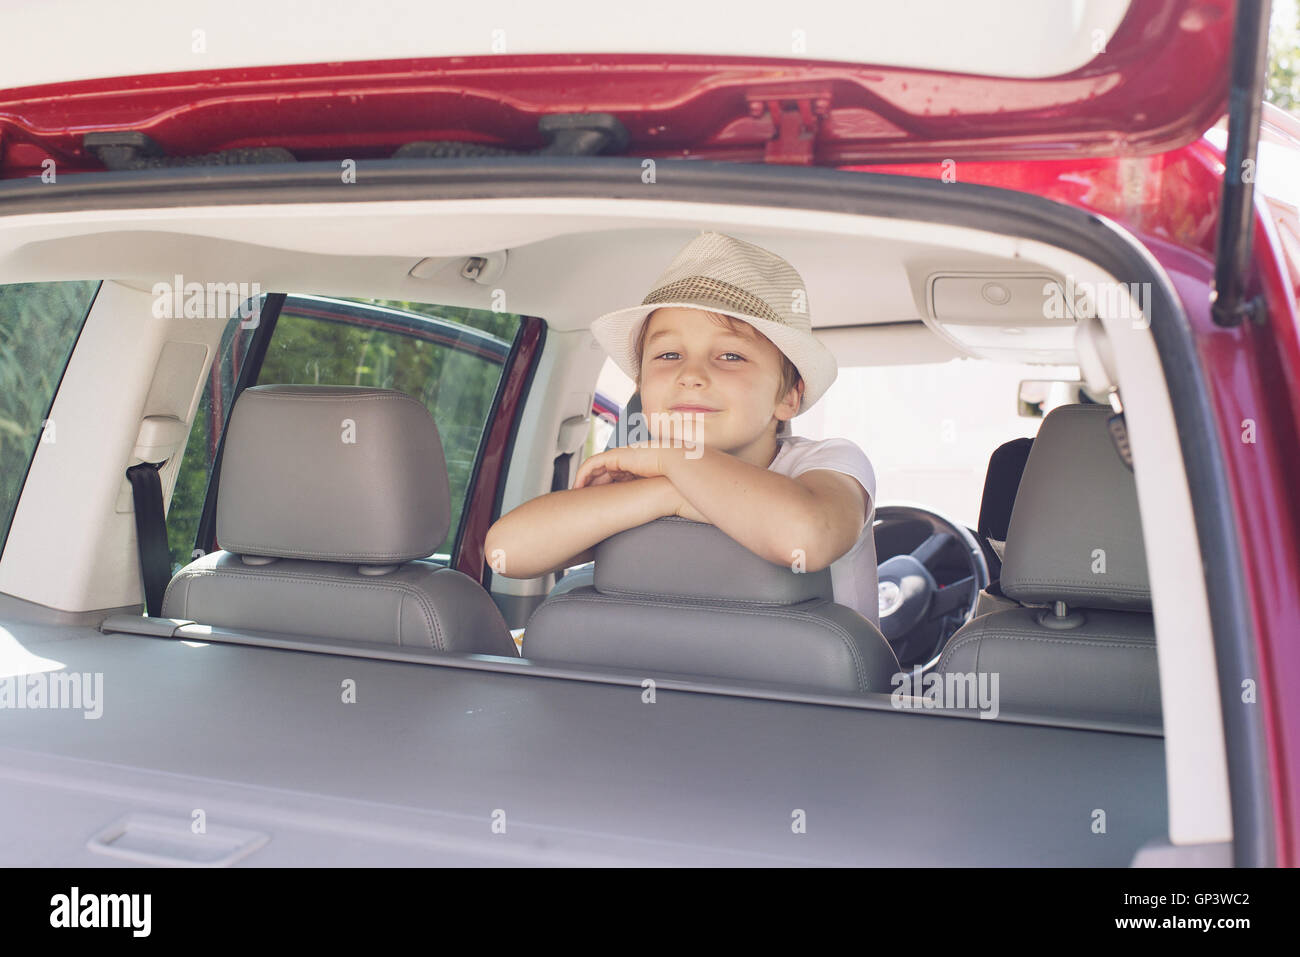 Boy looking out of back seat of car Stock Photo